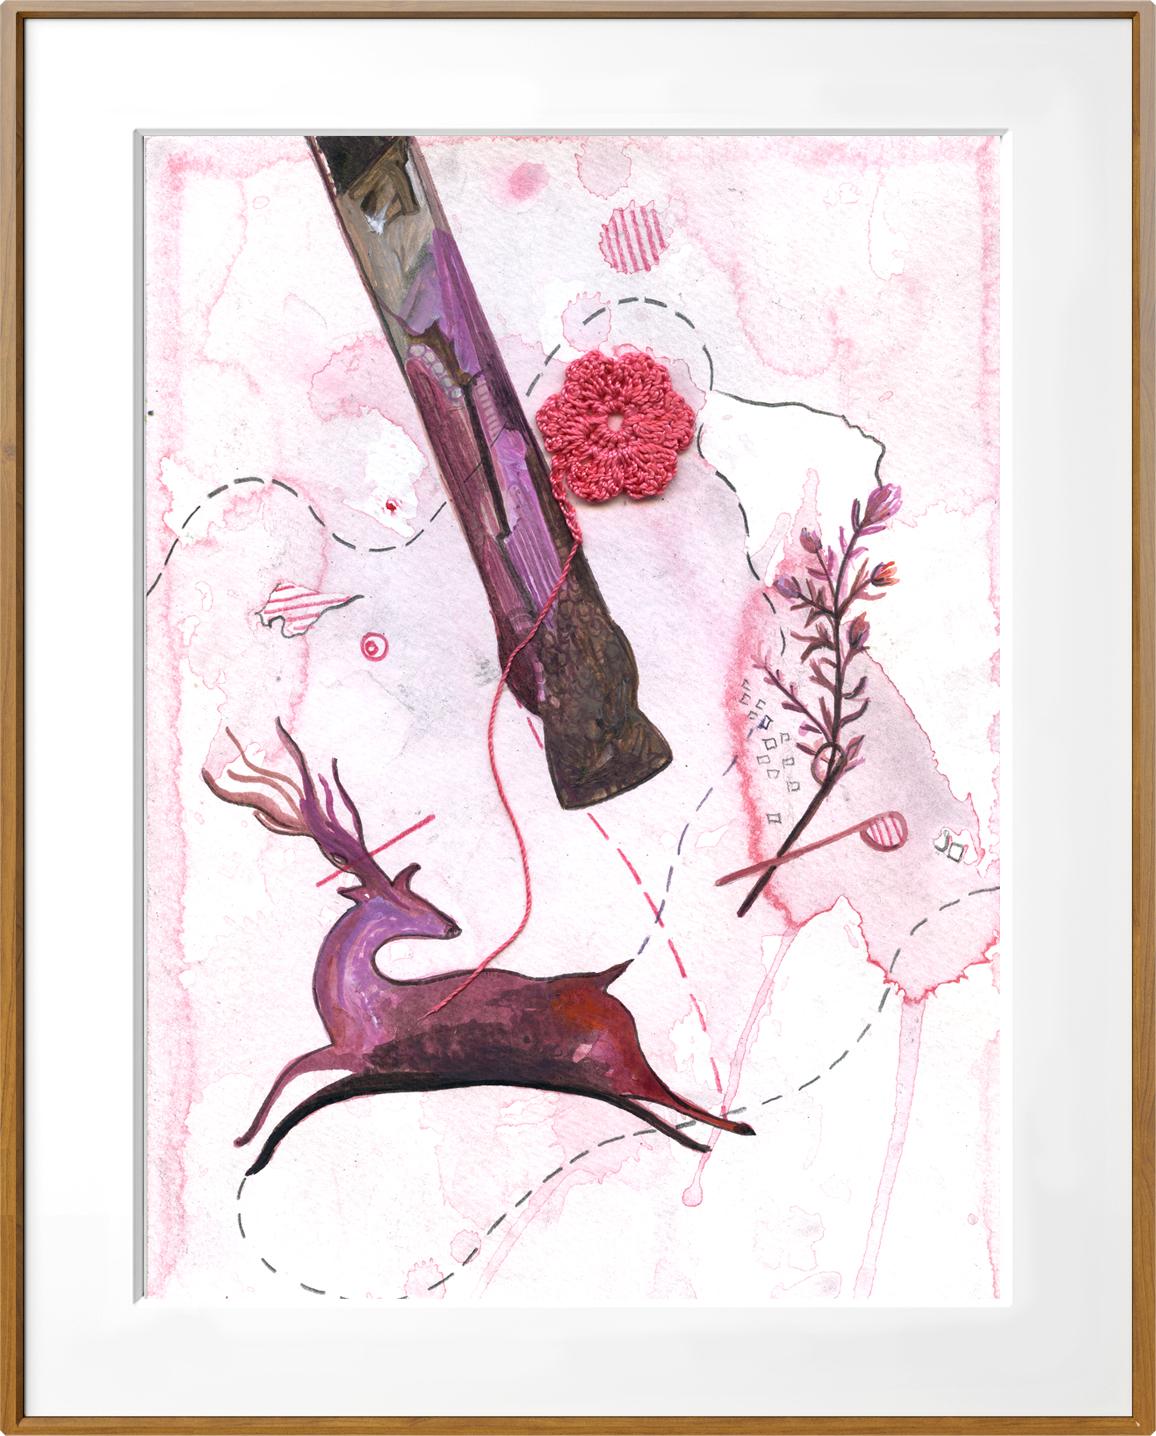 Birth Healing -  14 panel Pink, Red, and Grey Painting by Indian Artist  8